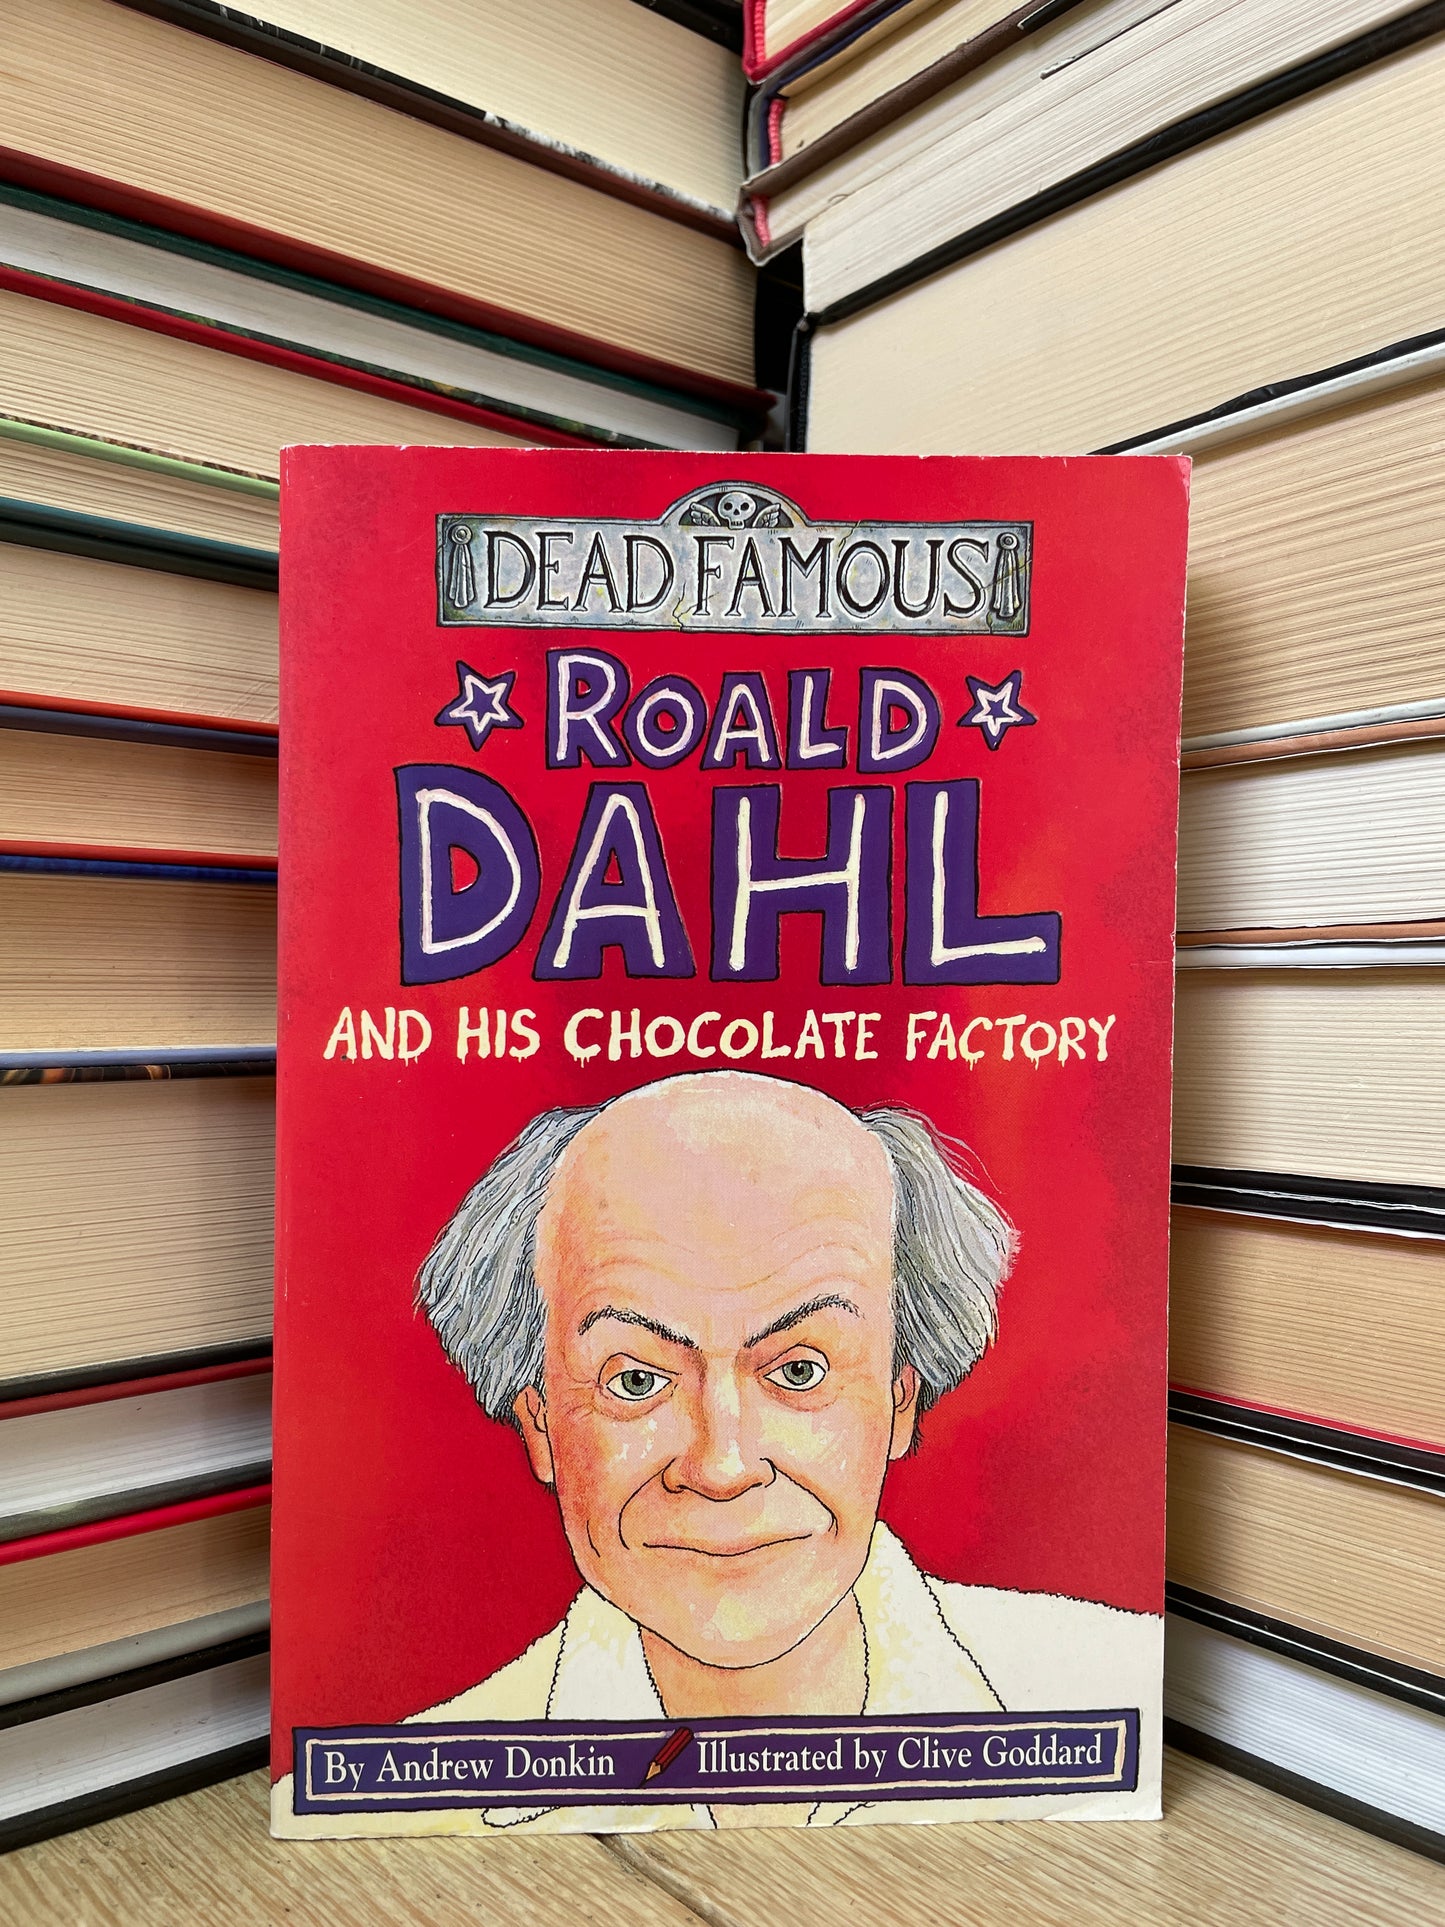 Andrew Donkin - Roald Dahl and His Chocolate Factory